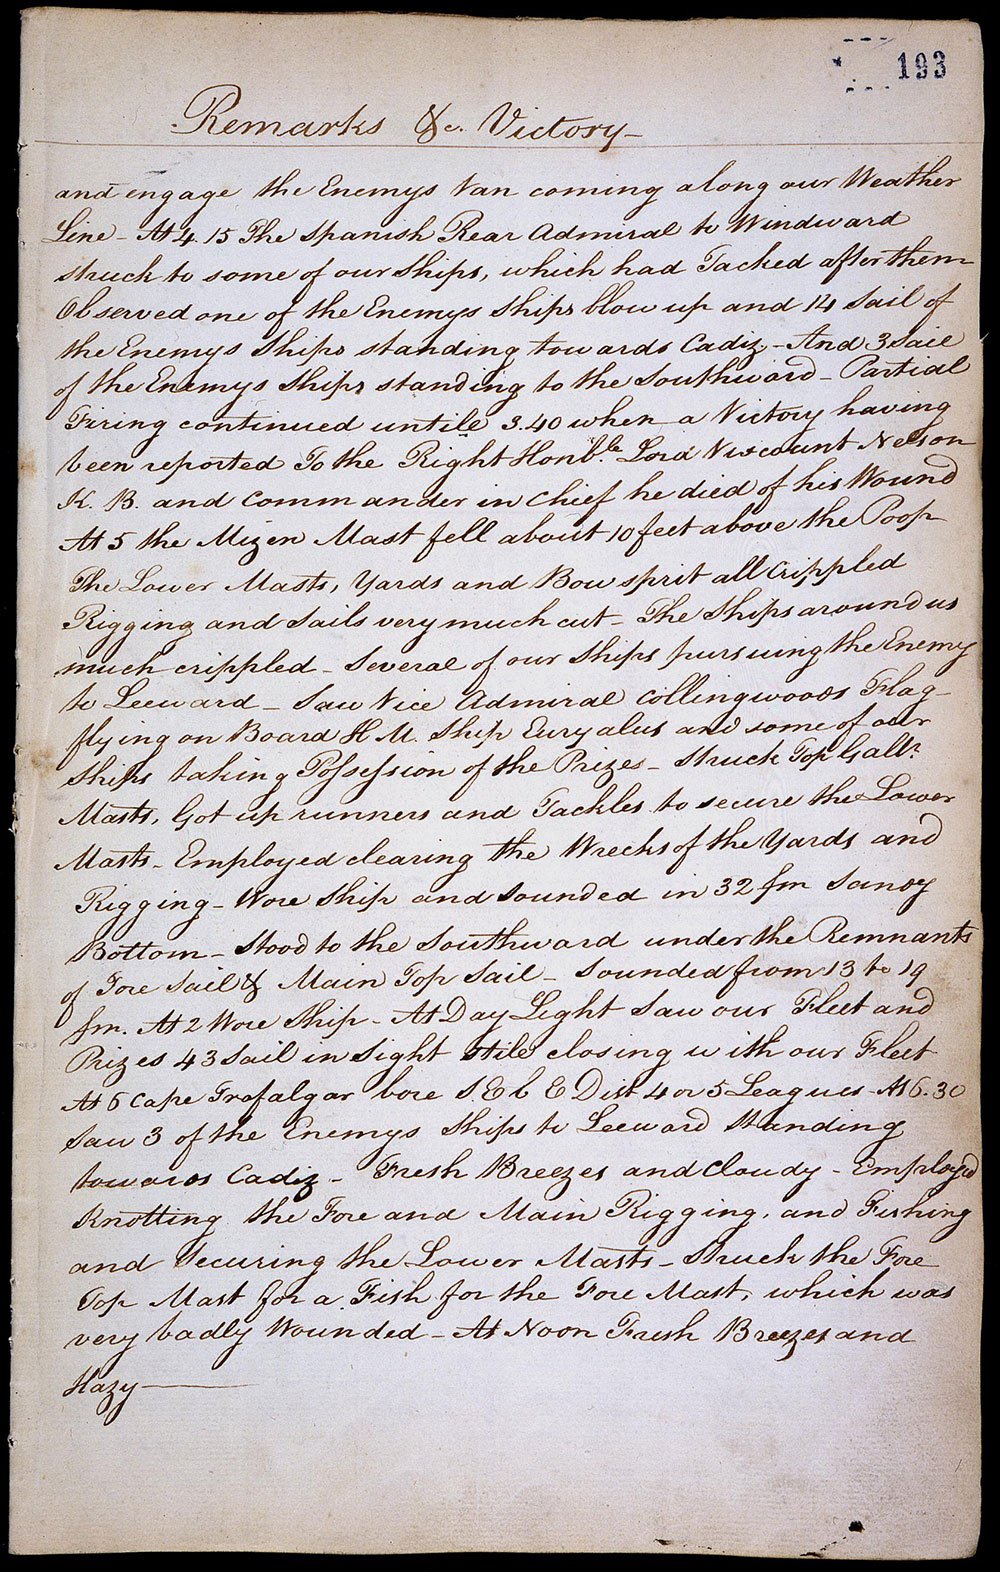 A hand written page of text titled 'Remarks for Victory'